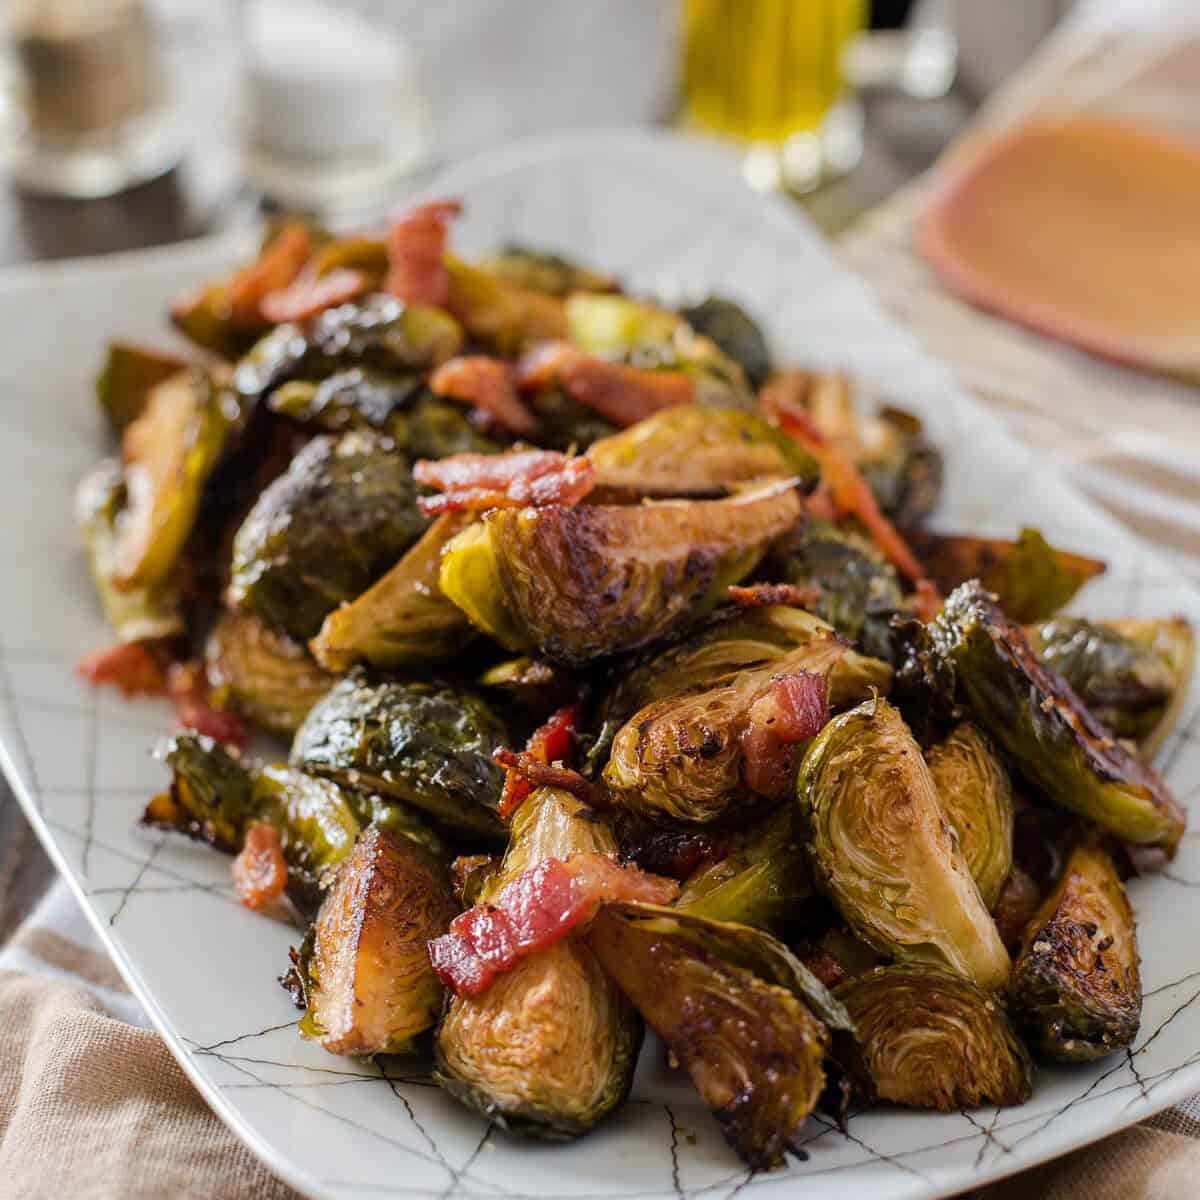 Most Popular in 2016: #8 Bacon Balsamic Roasted Brussels Sprouts